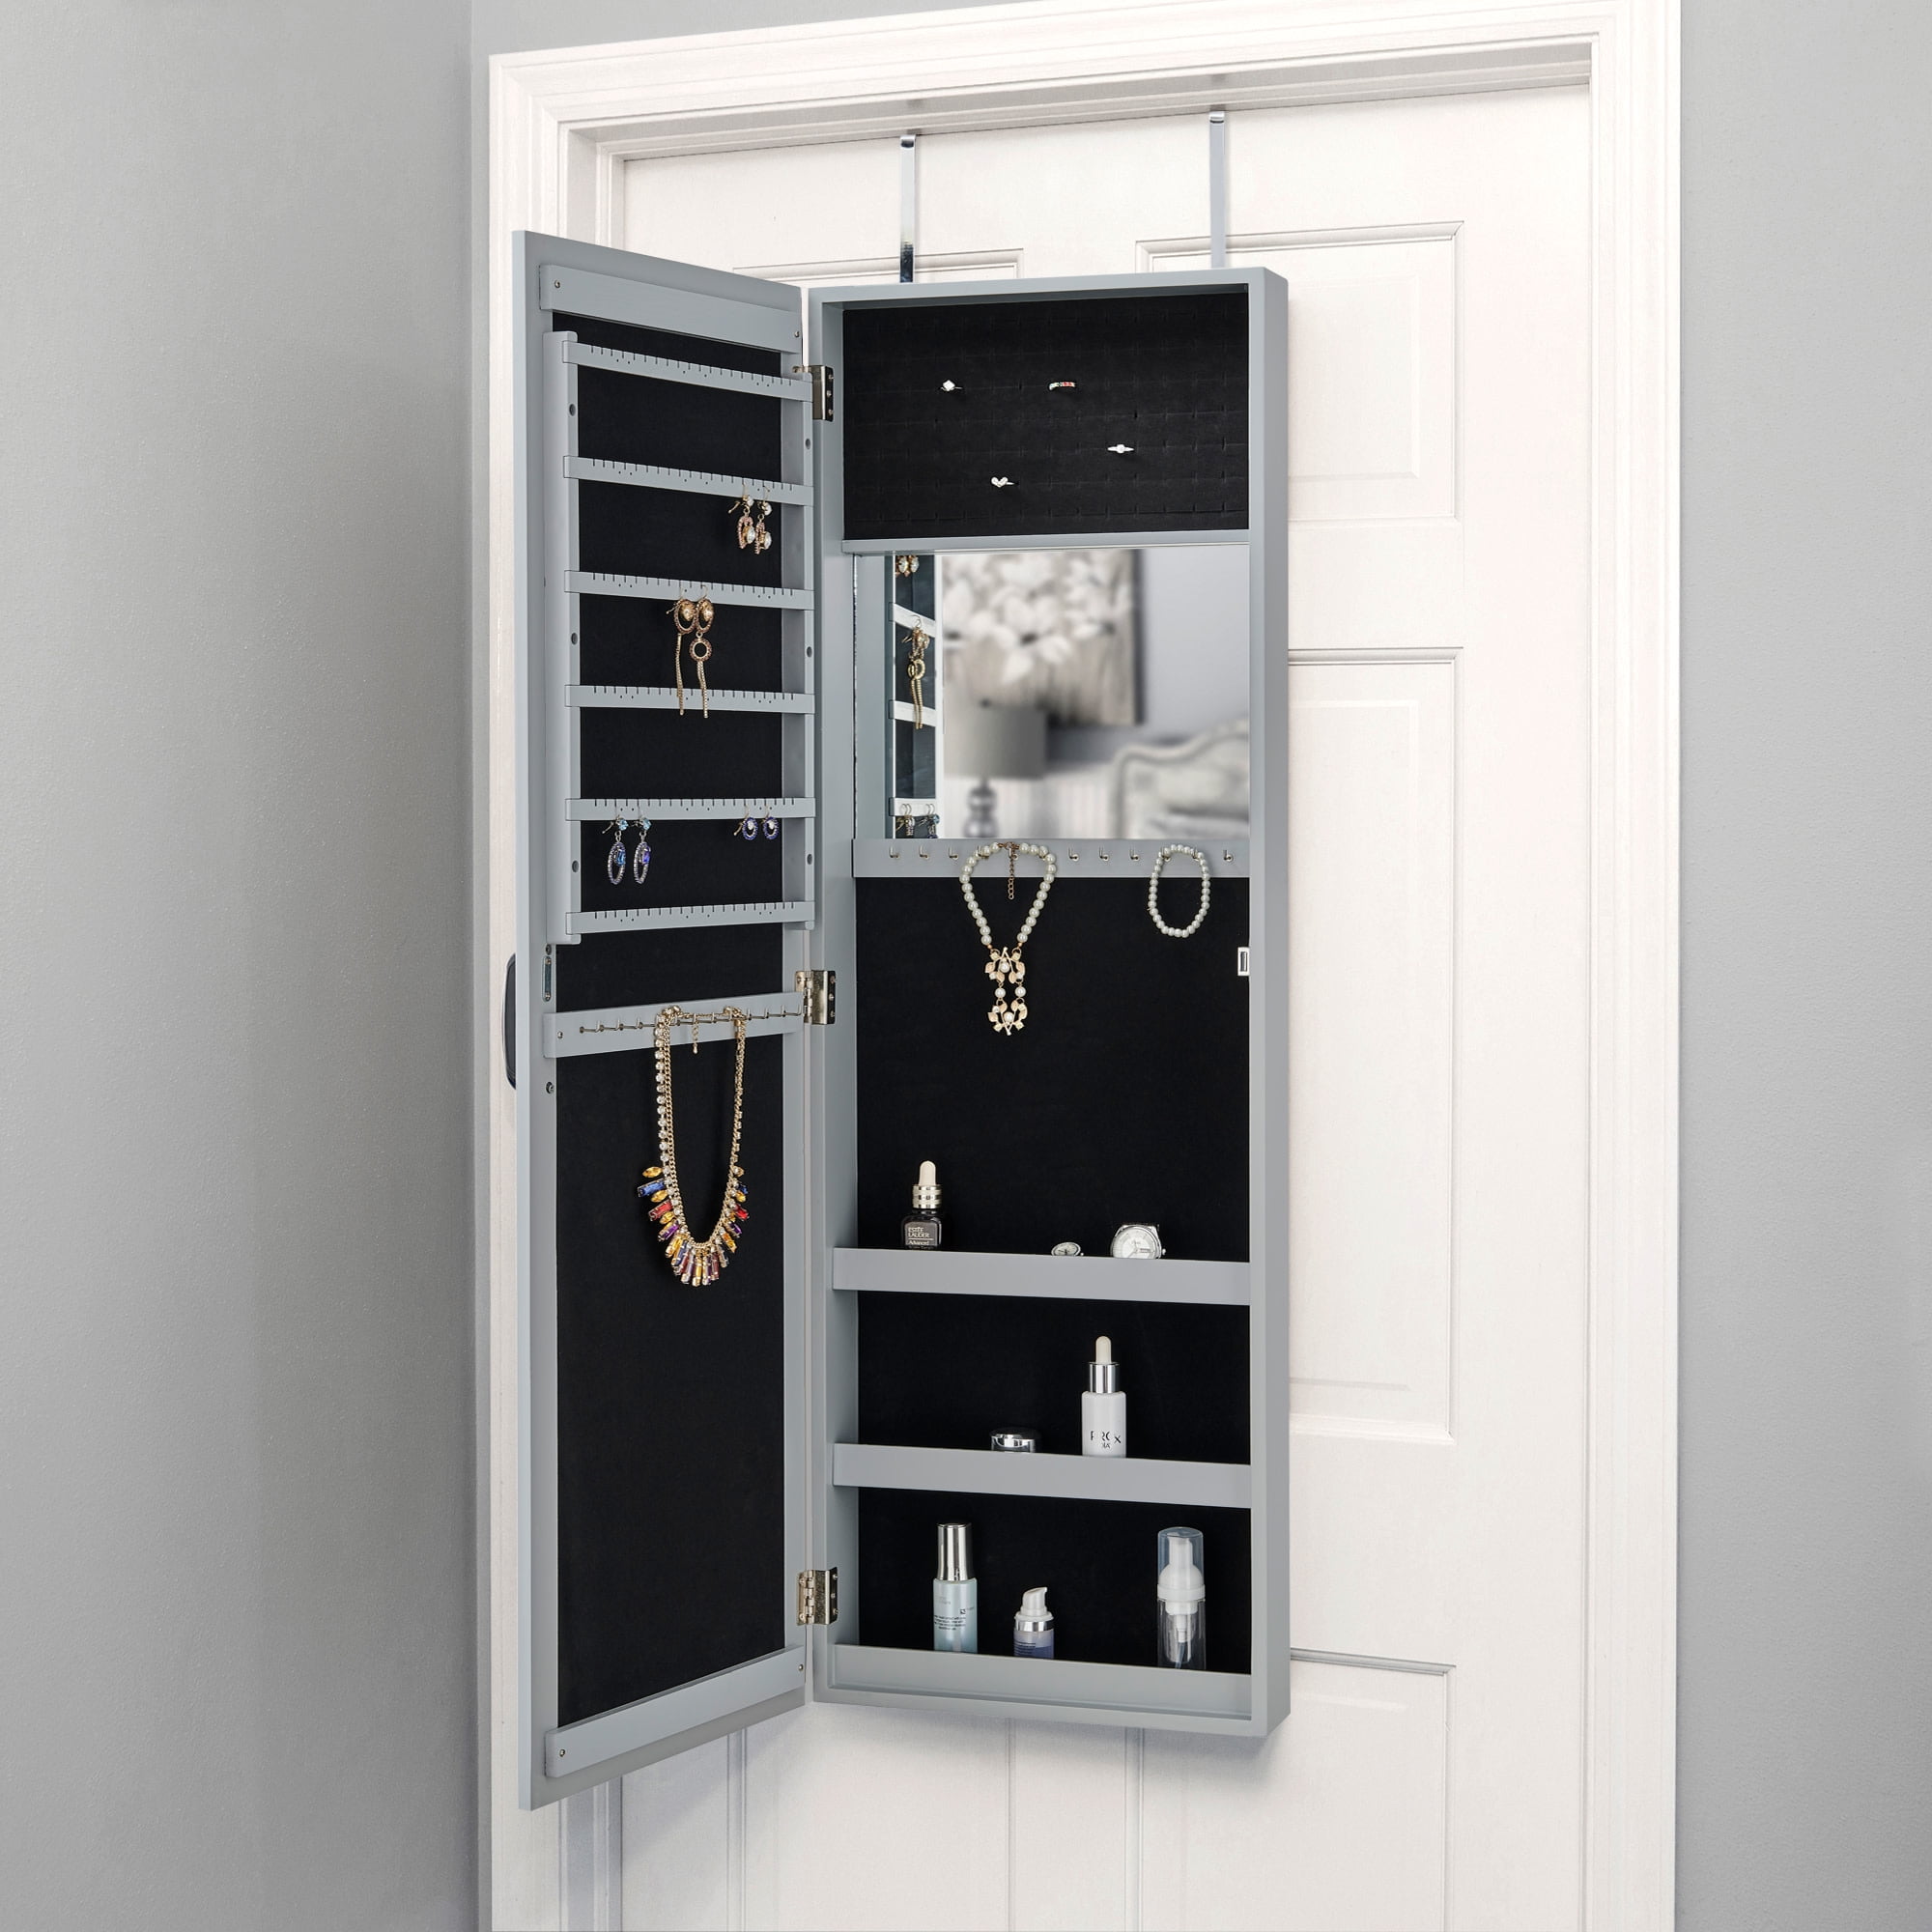 55. Before and After: Shutter Door Jewelry Storage – The Craft Queen